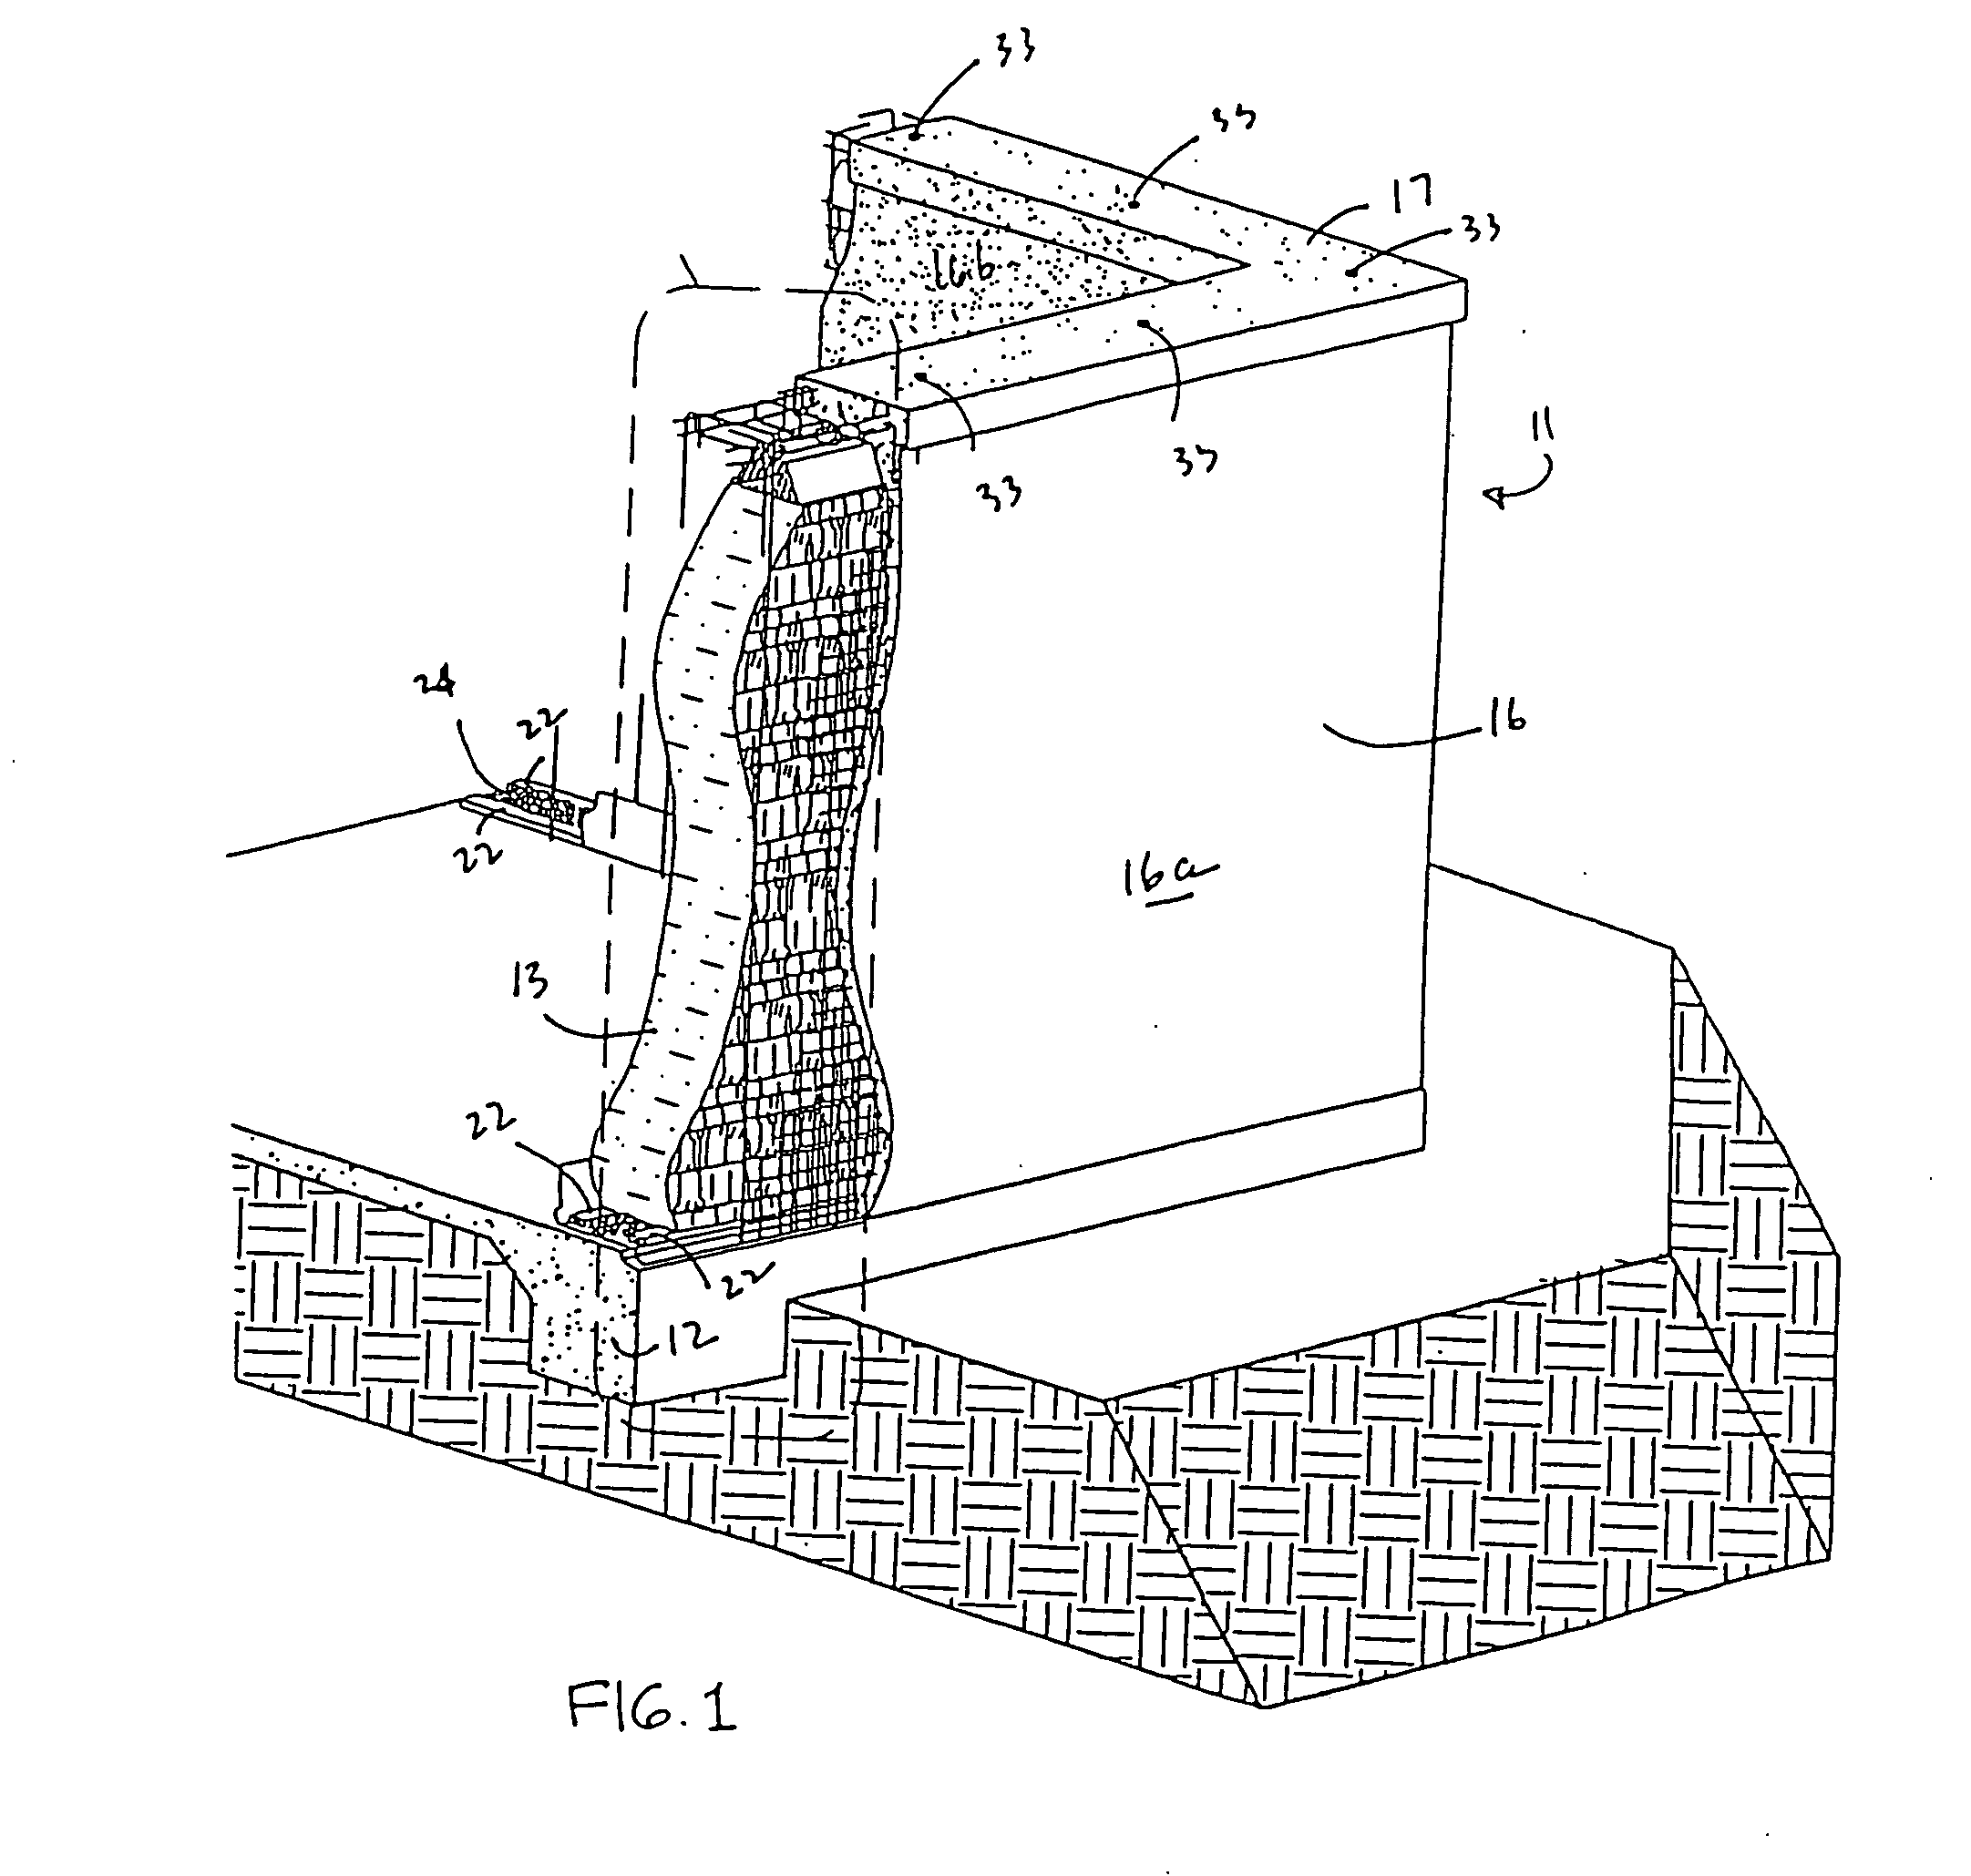 Methods and apparatus for controlling moisture in straw bale core walls